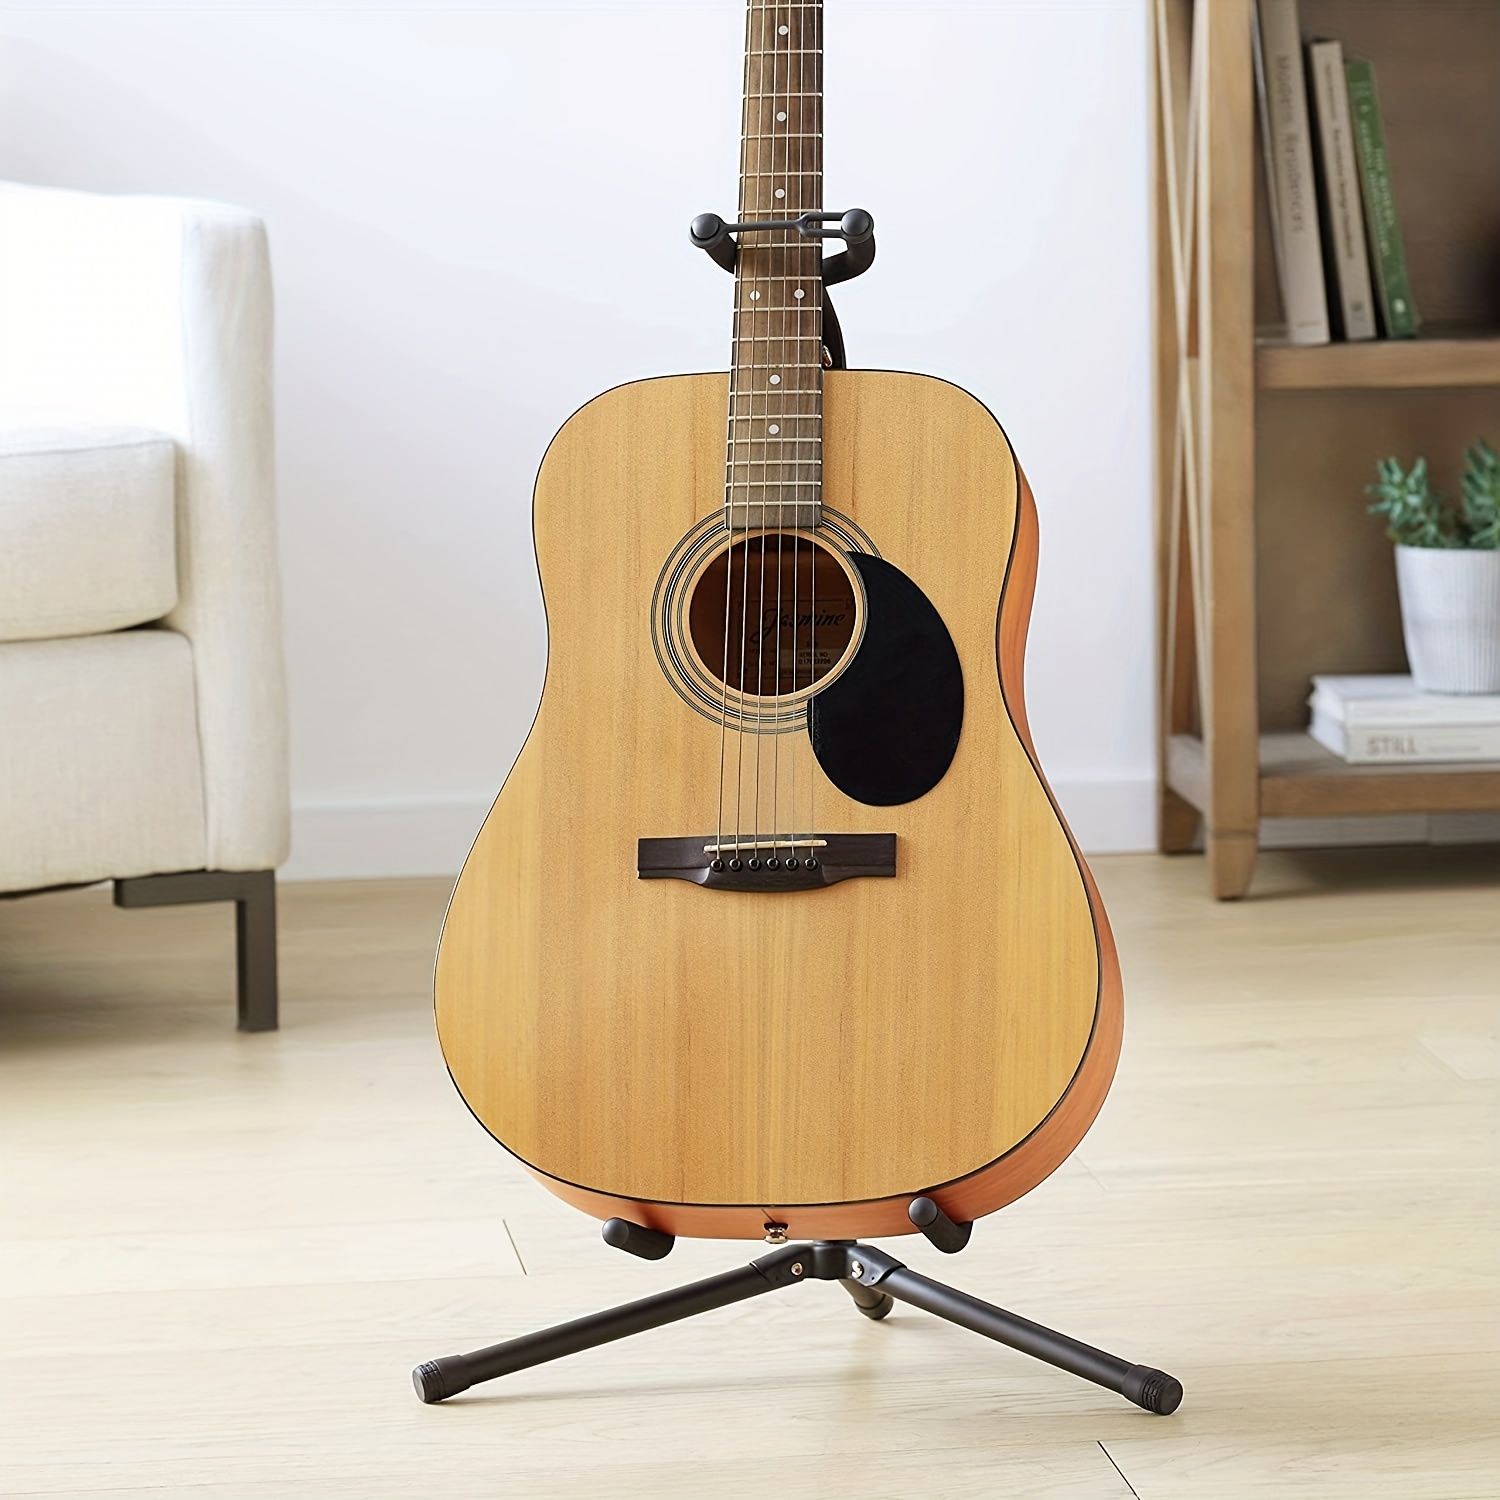 

Compact & Portable Vertical Guitar Stand - Fully Foldable For Easy Storage